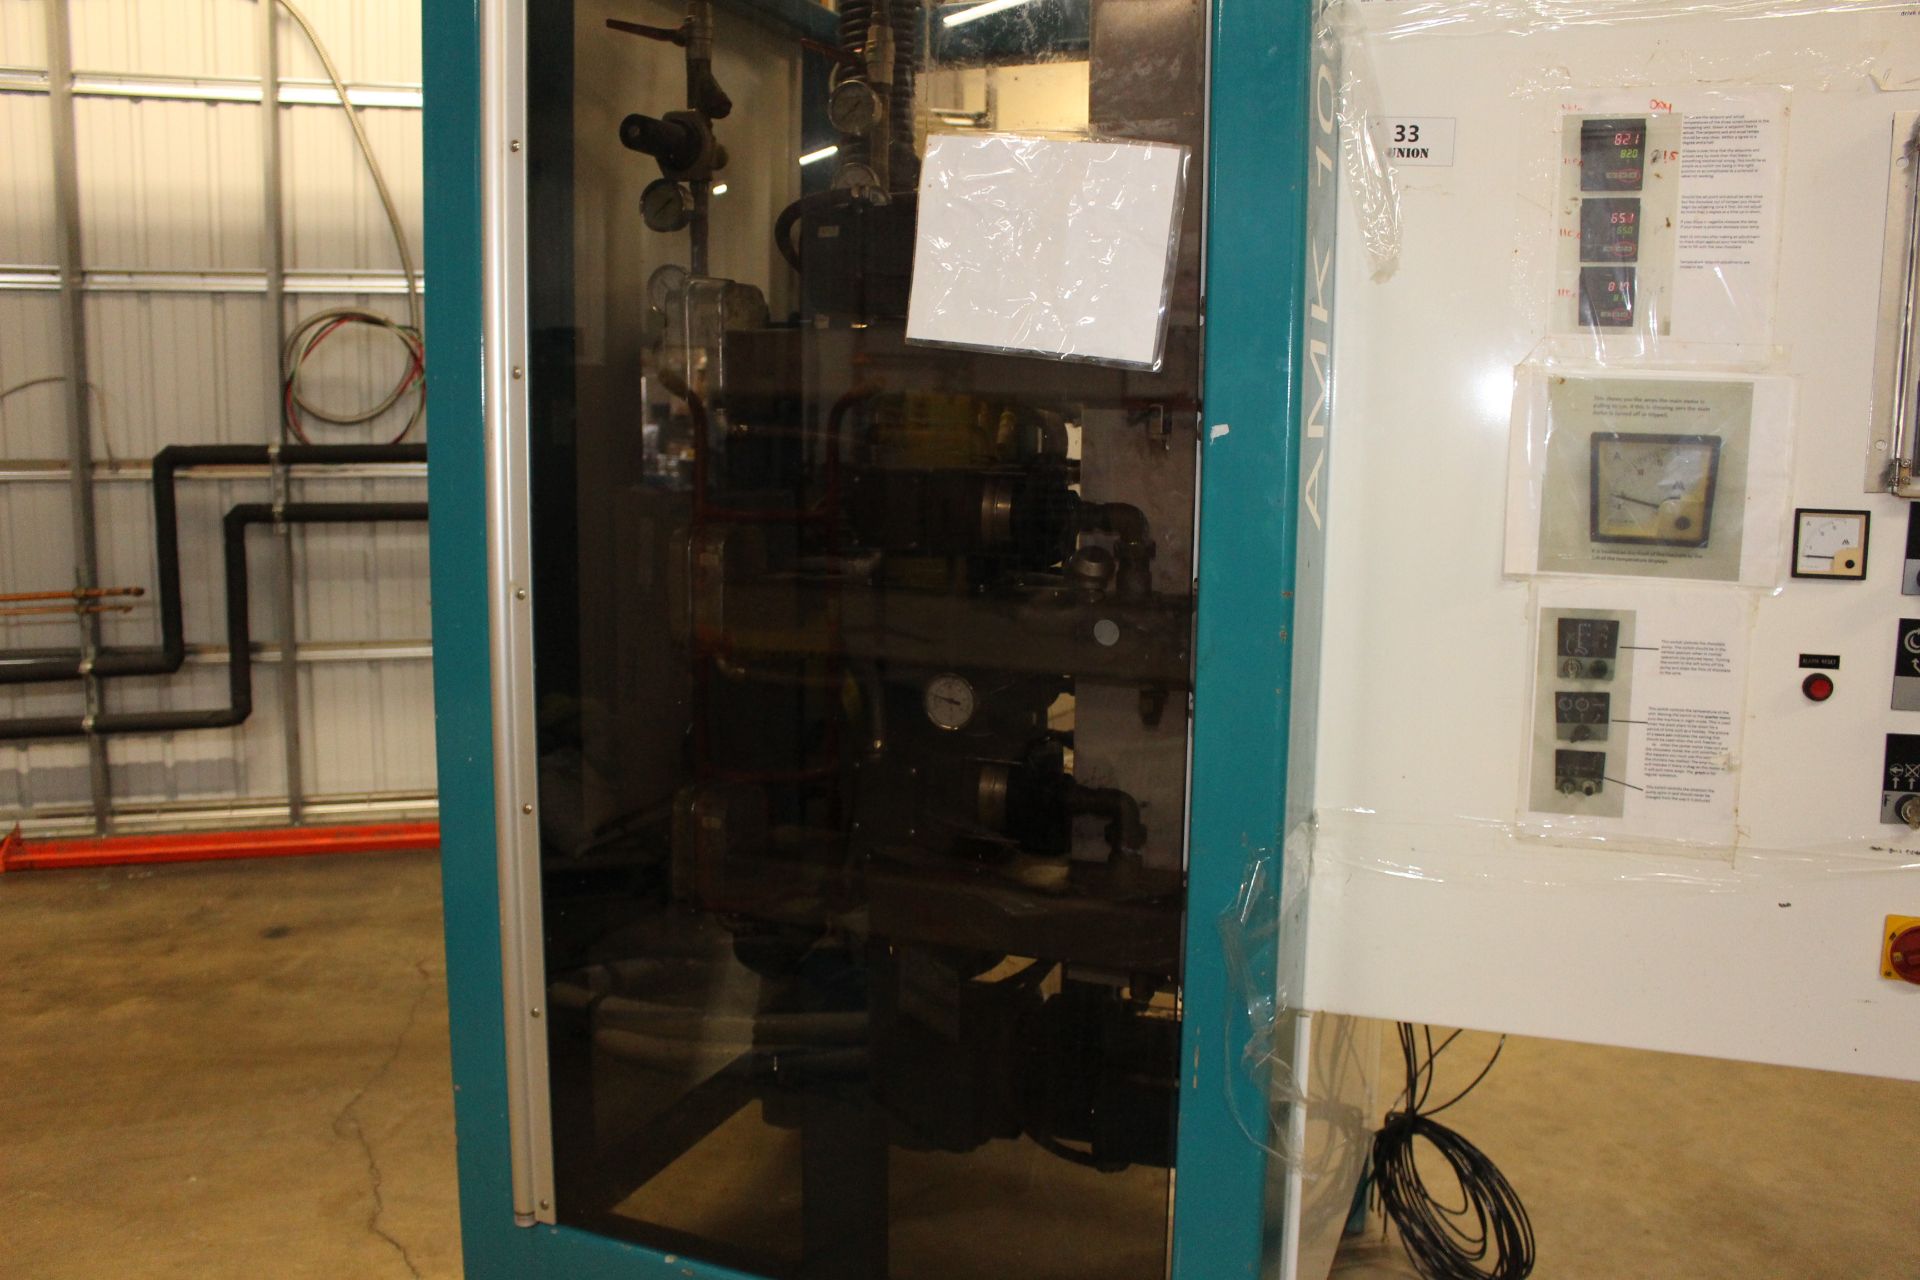 Asset 33 - Aasted AMK-1000 1000 kg/hr Tempering Unit serial#3289-03-001 built 2002, 3 stages with - Image 7 of 8